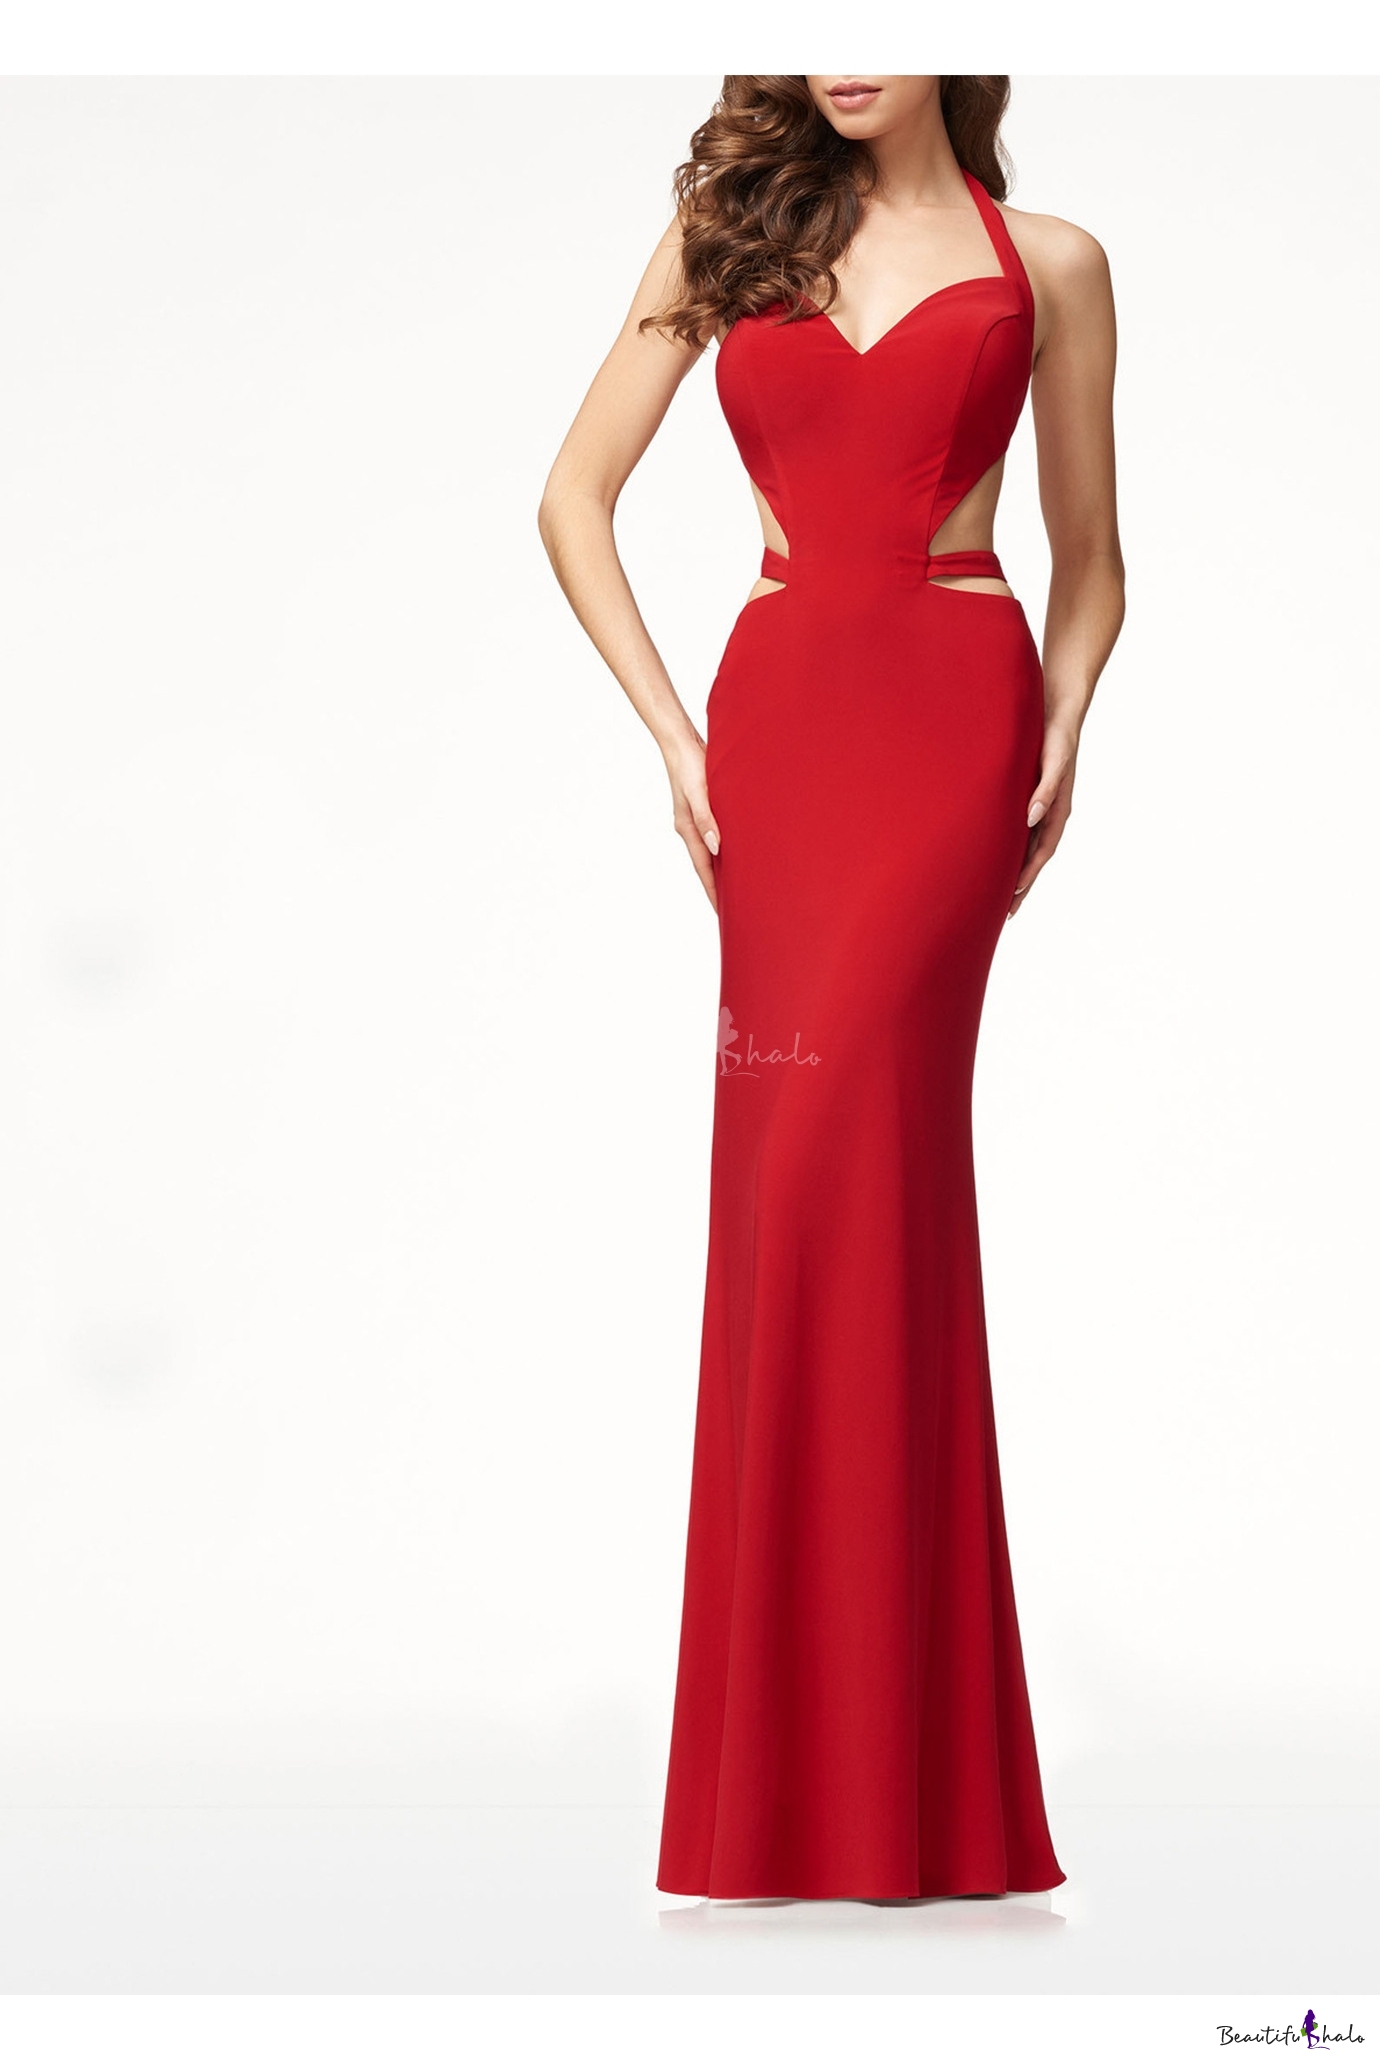 plain red gown